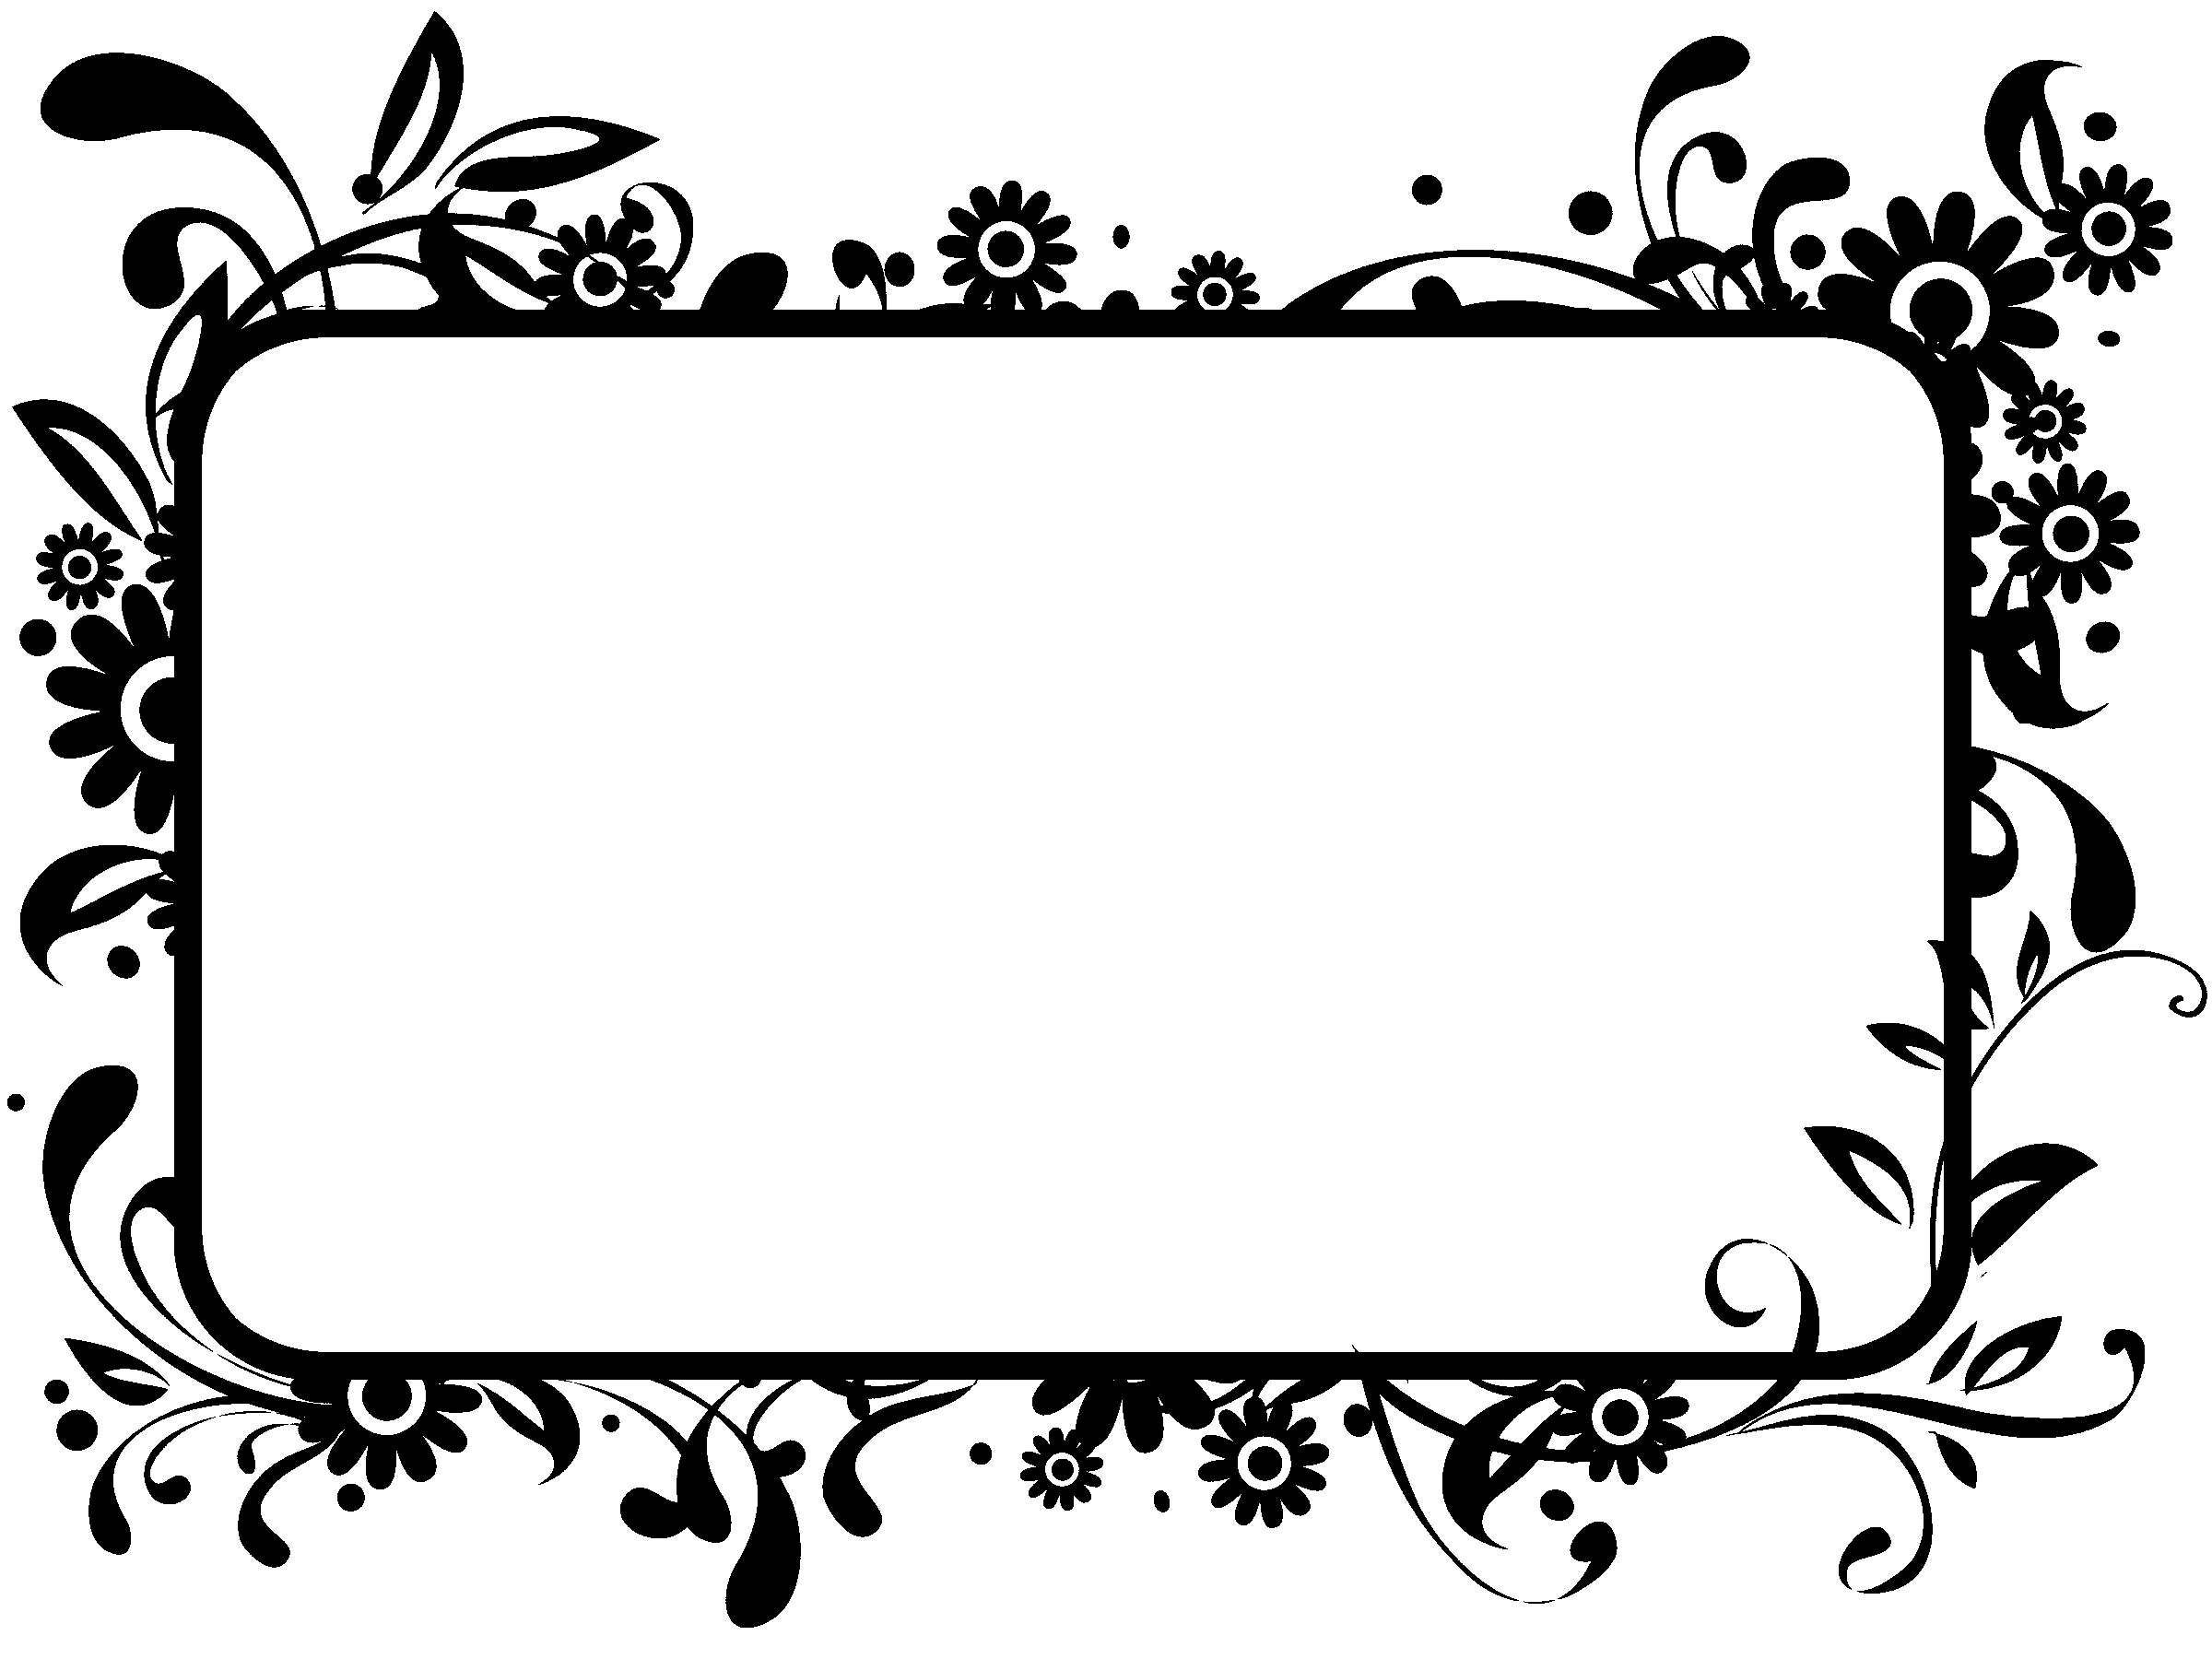 Free Floral Frame Black And White, Download Free Floral Frame Black And